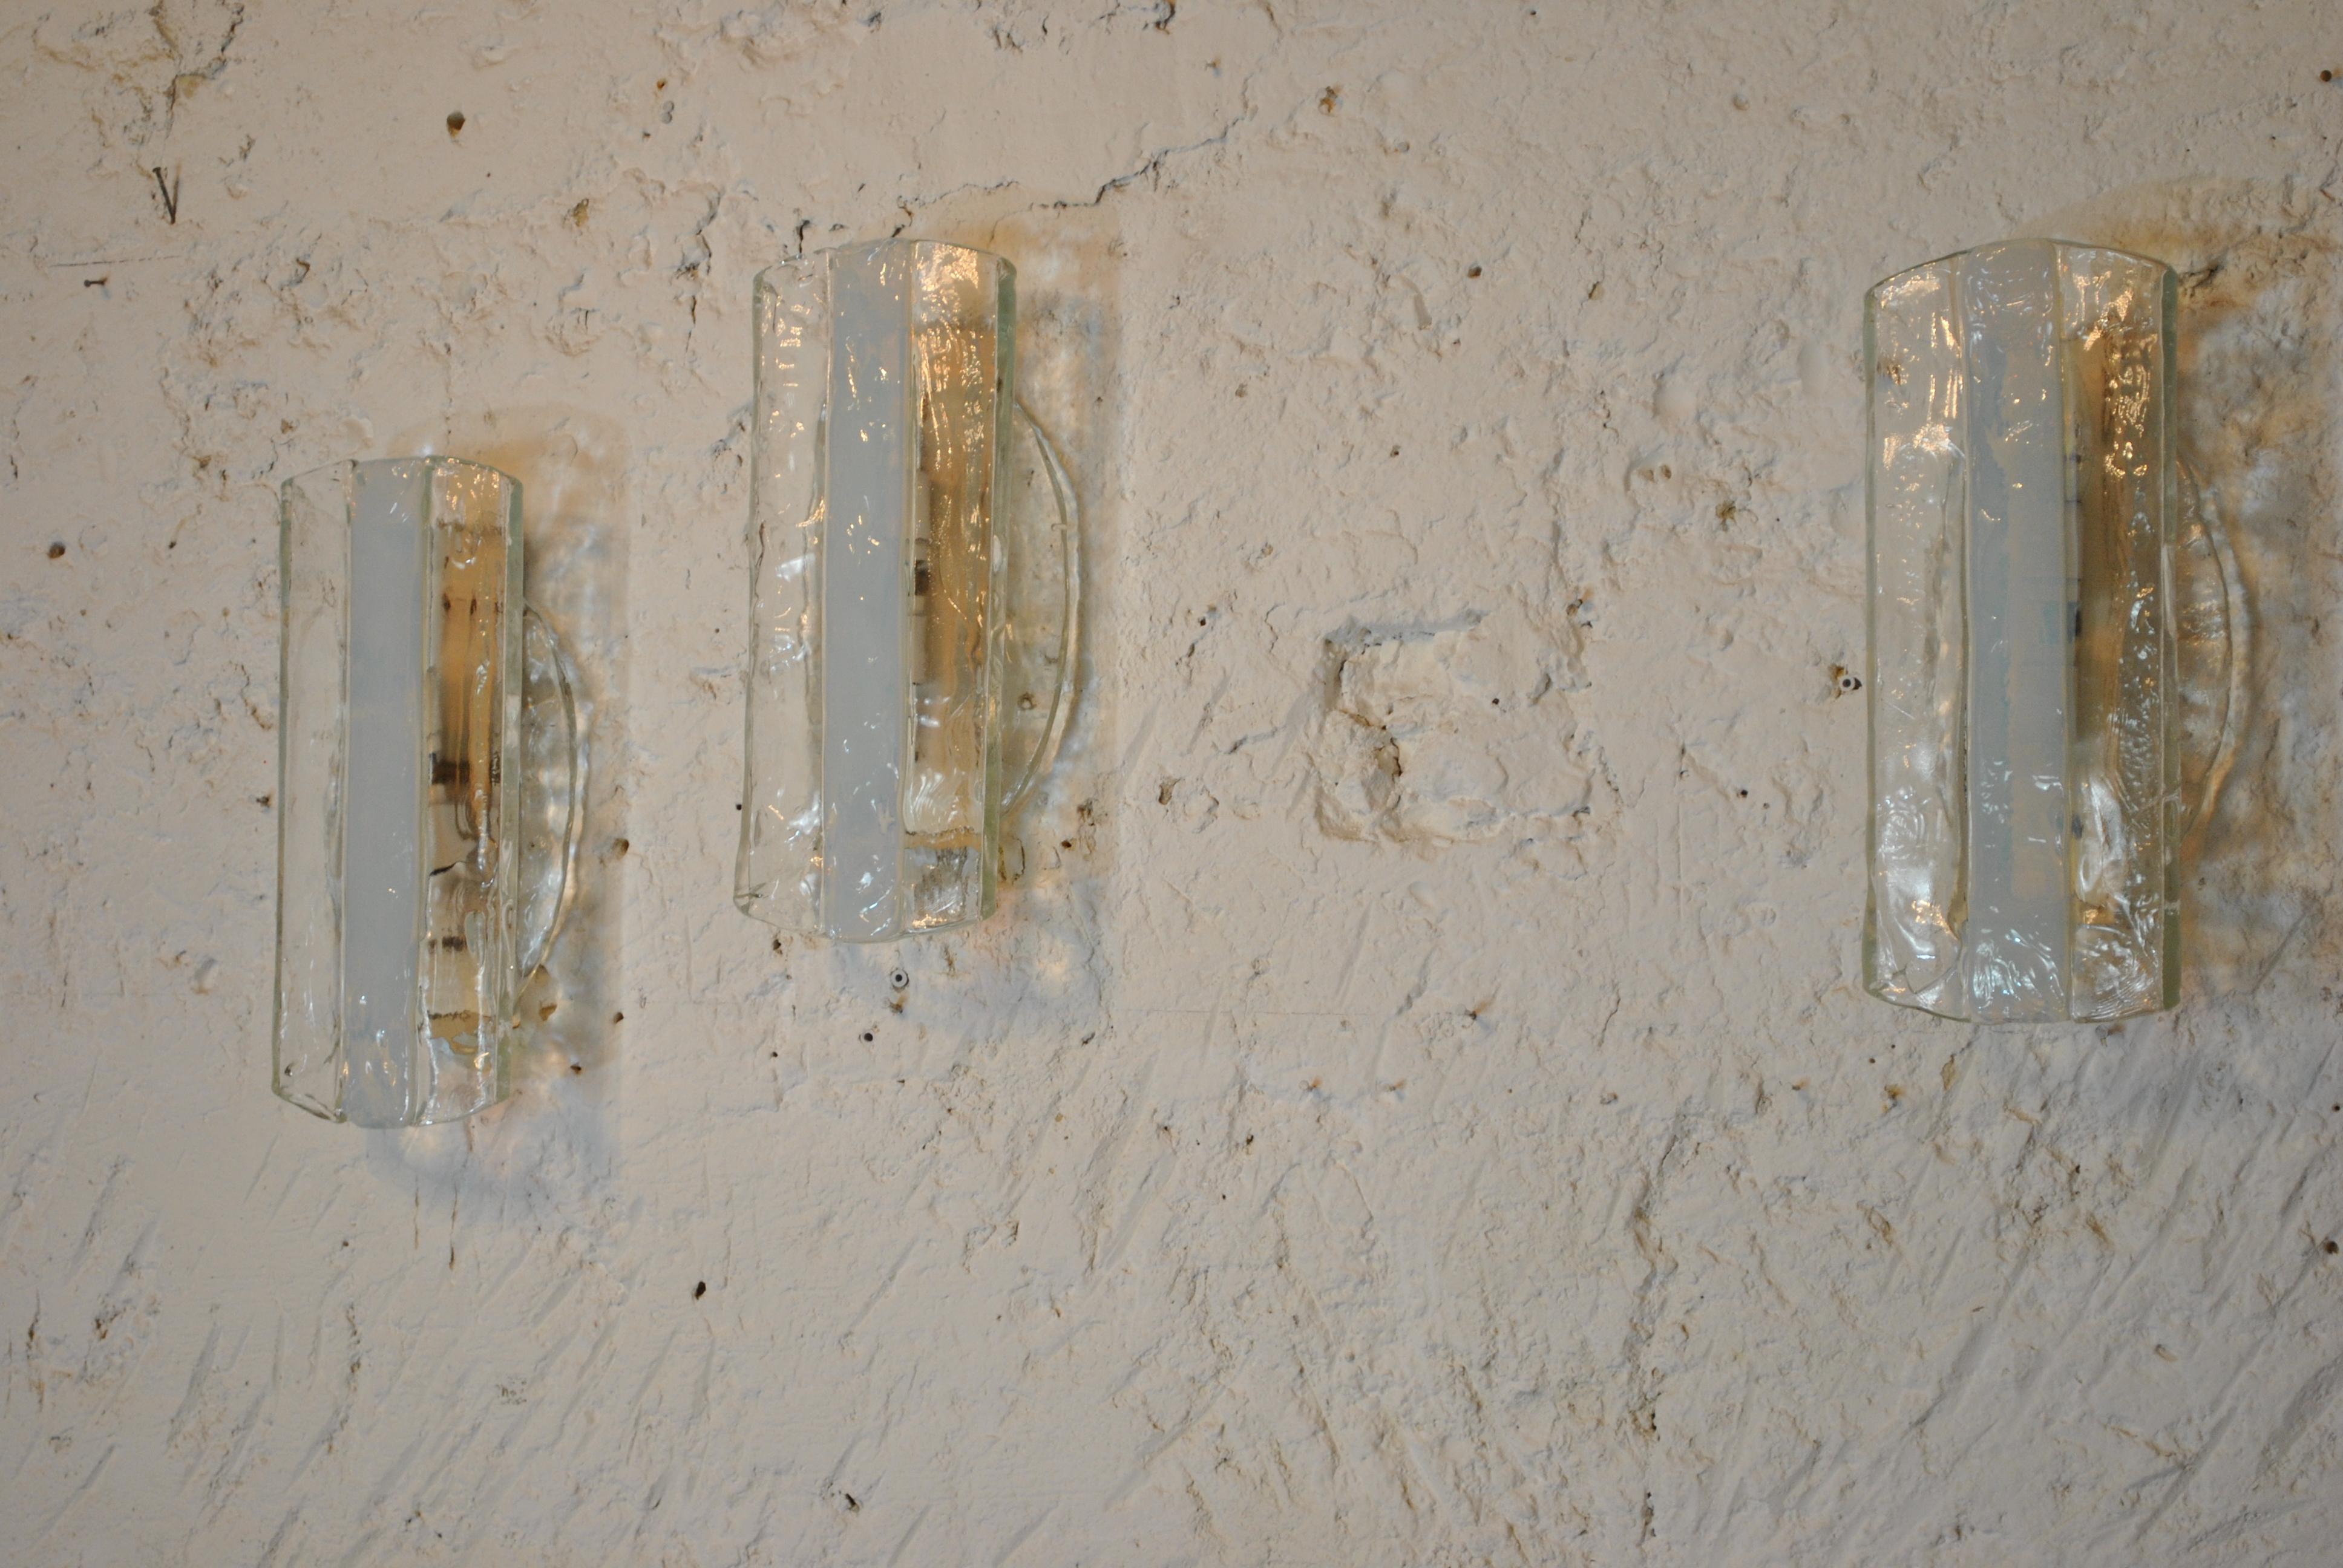 Mid-20th Century Mazzega Italian Midcentury Murano Sconces from the Late Sixties For Sale